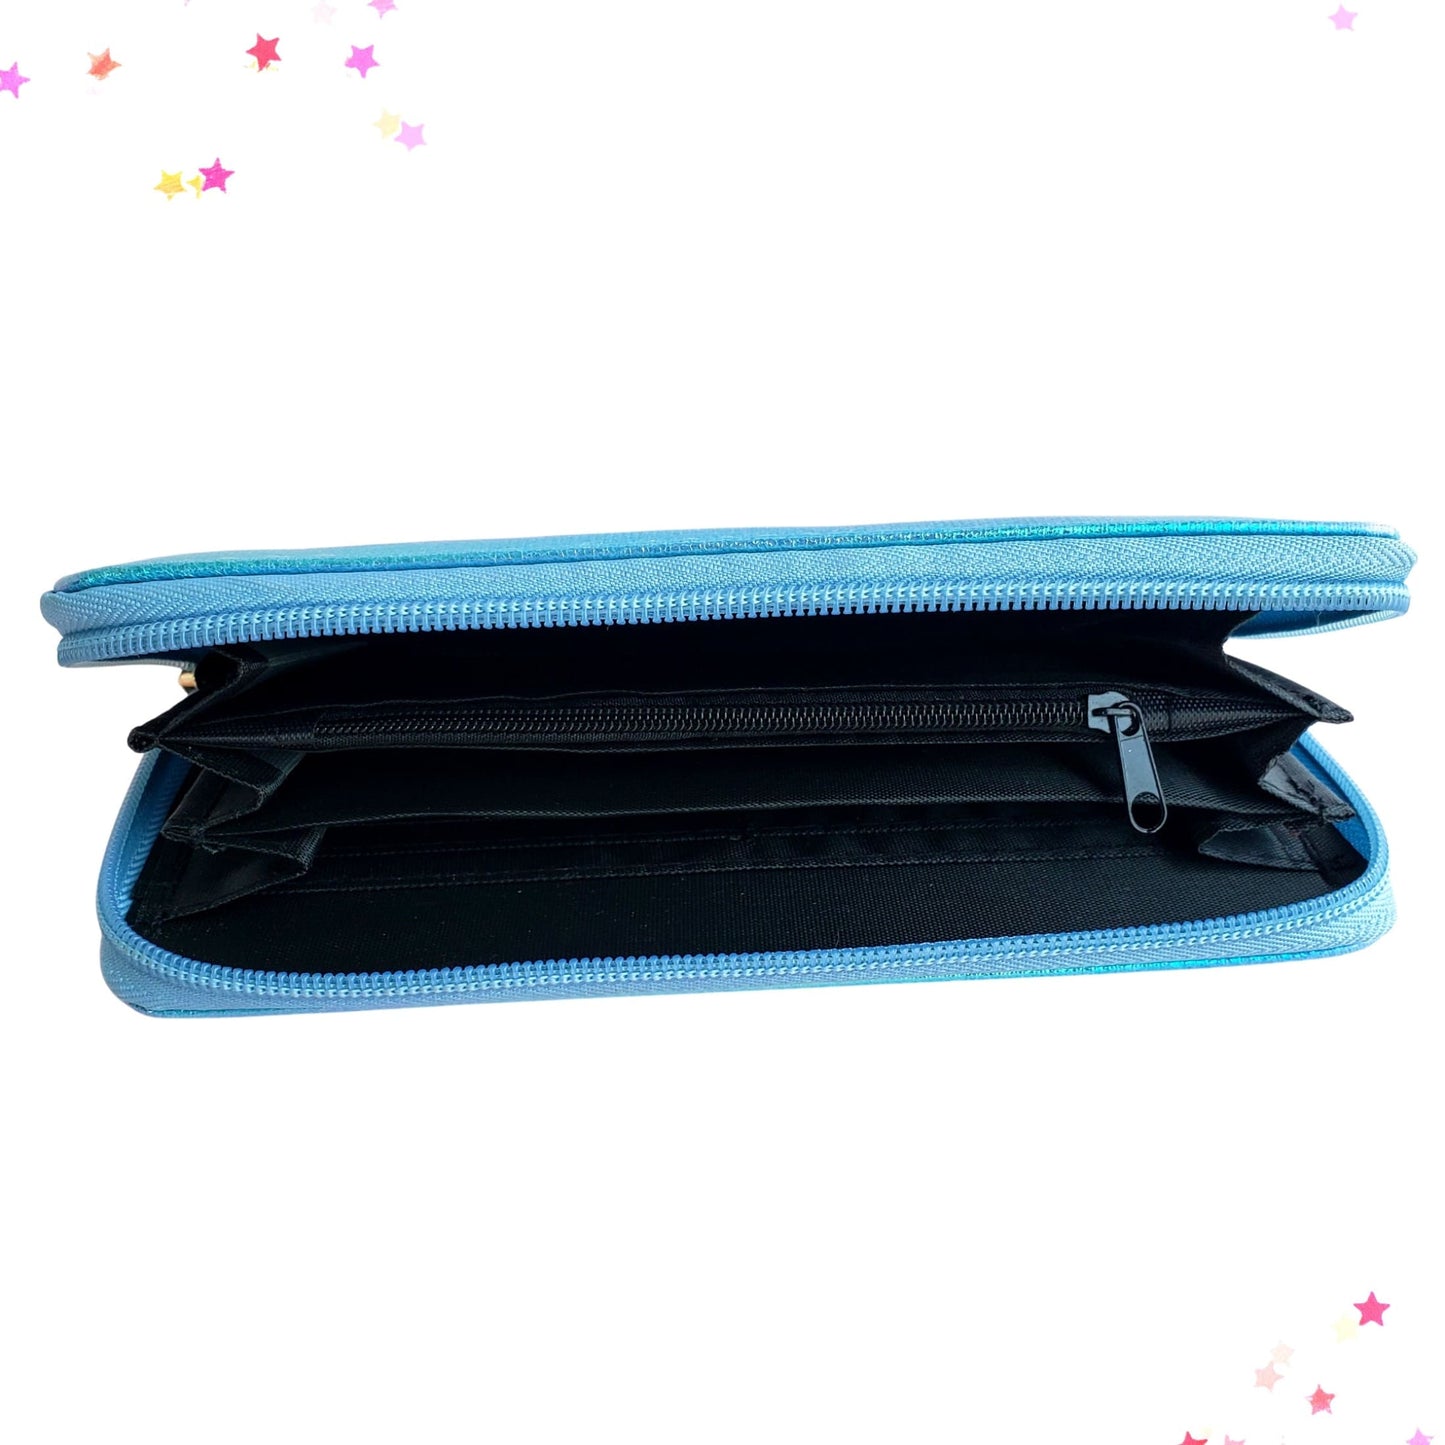 Iridescent Blue Mermaid Tail Wallet from Confetti Kitty, Only 18.99